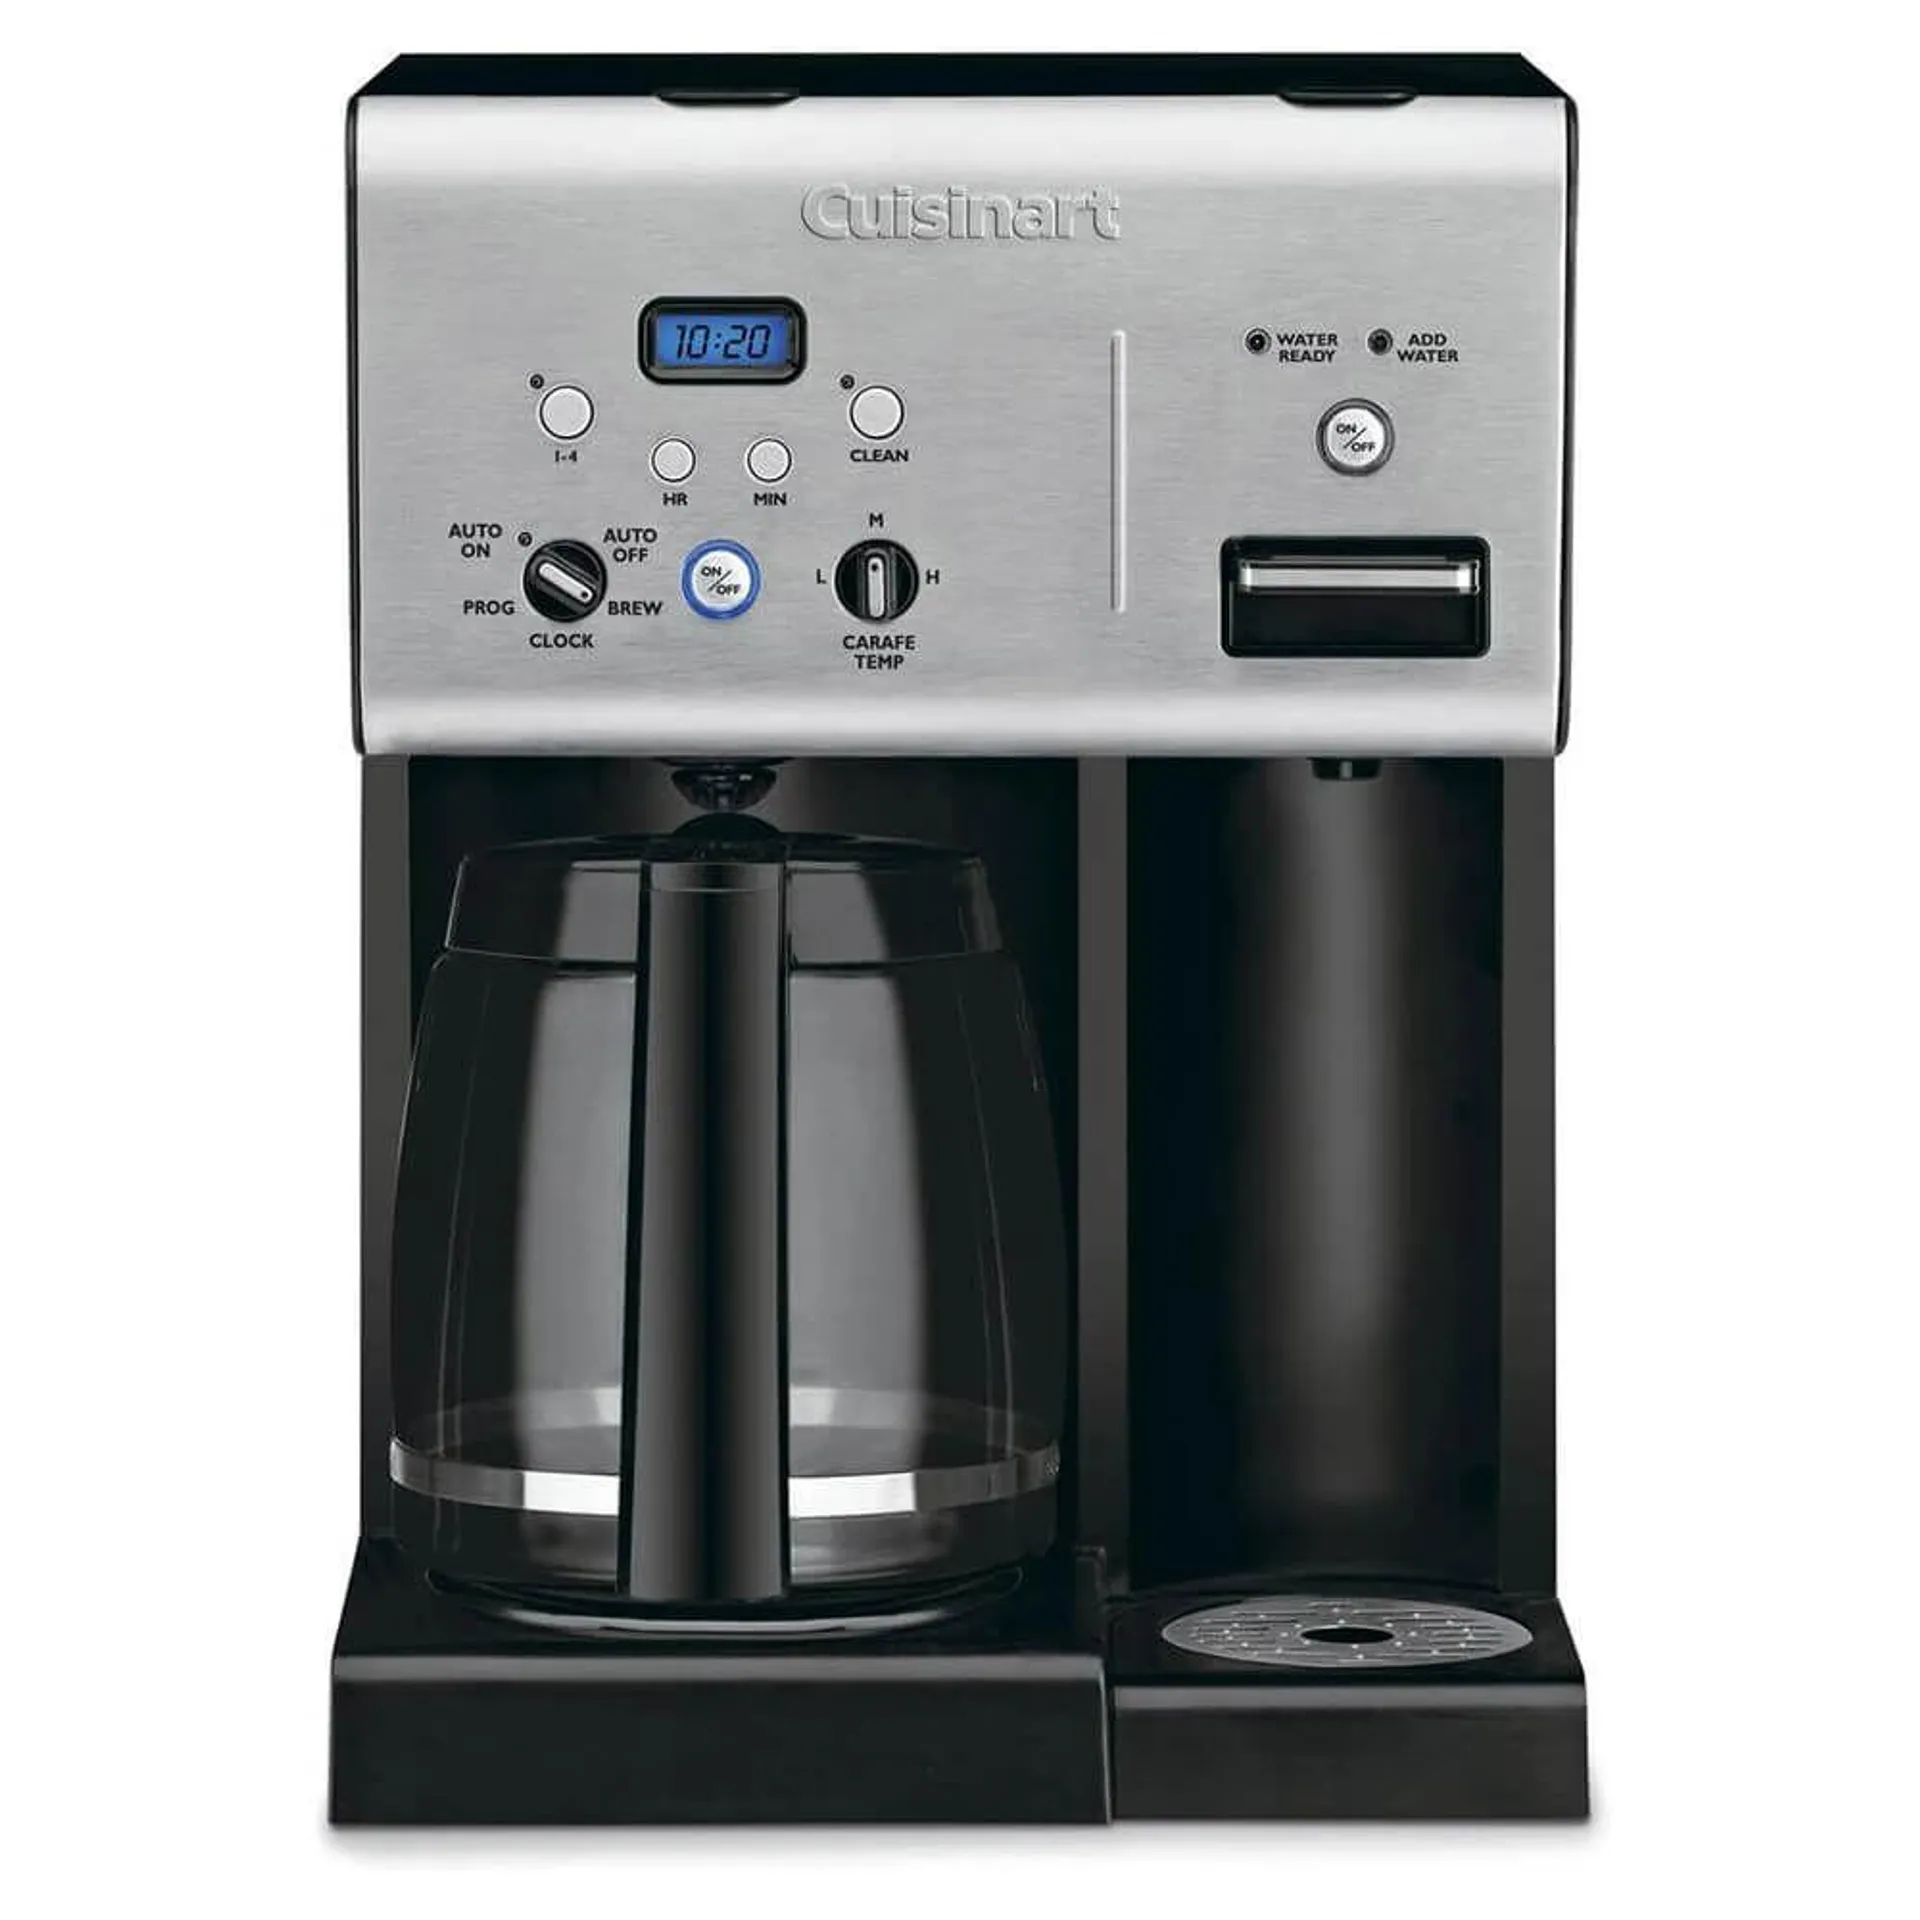 Cuisinart 12-Cup Programmable Coffee Maker (Factory Refurbished)